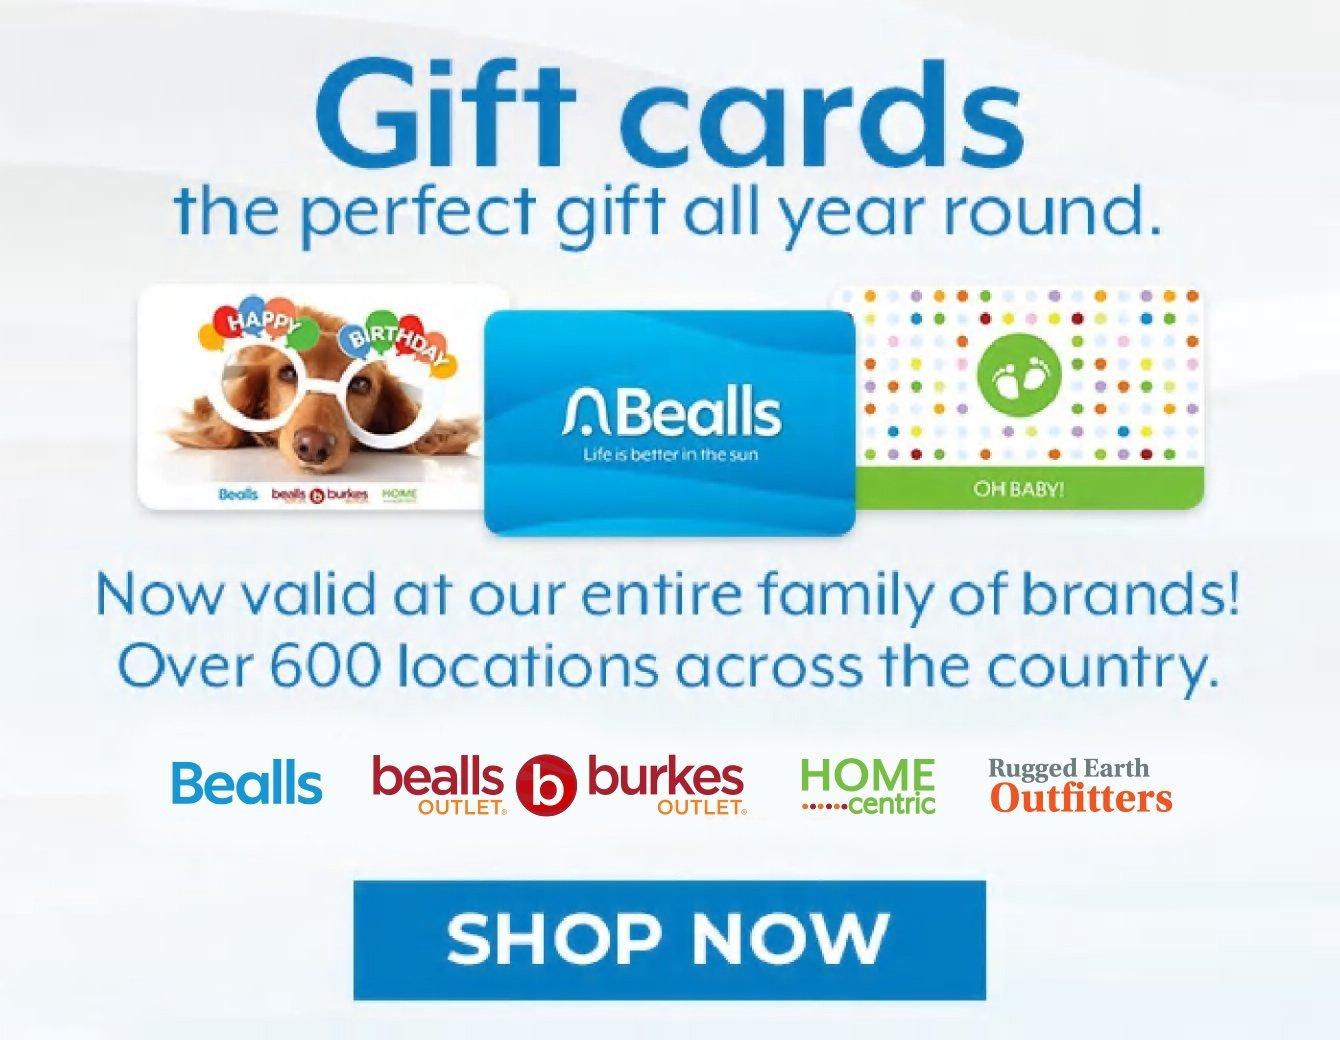 Gift cards - The perfect gift all year round. Use in-store and online. Shop Now